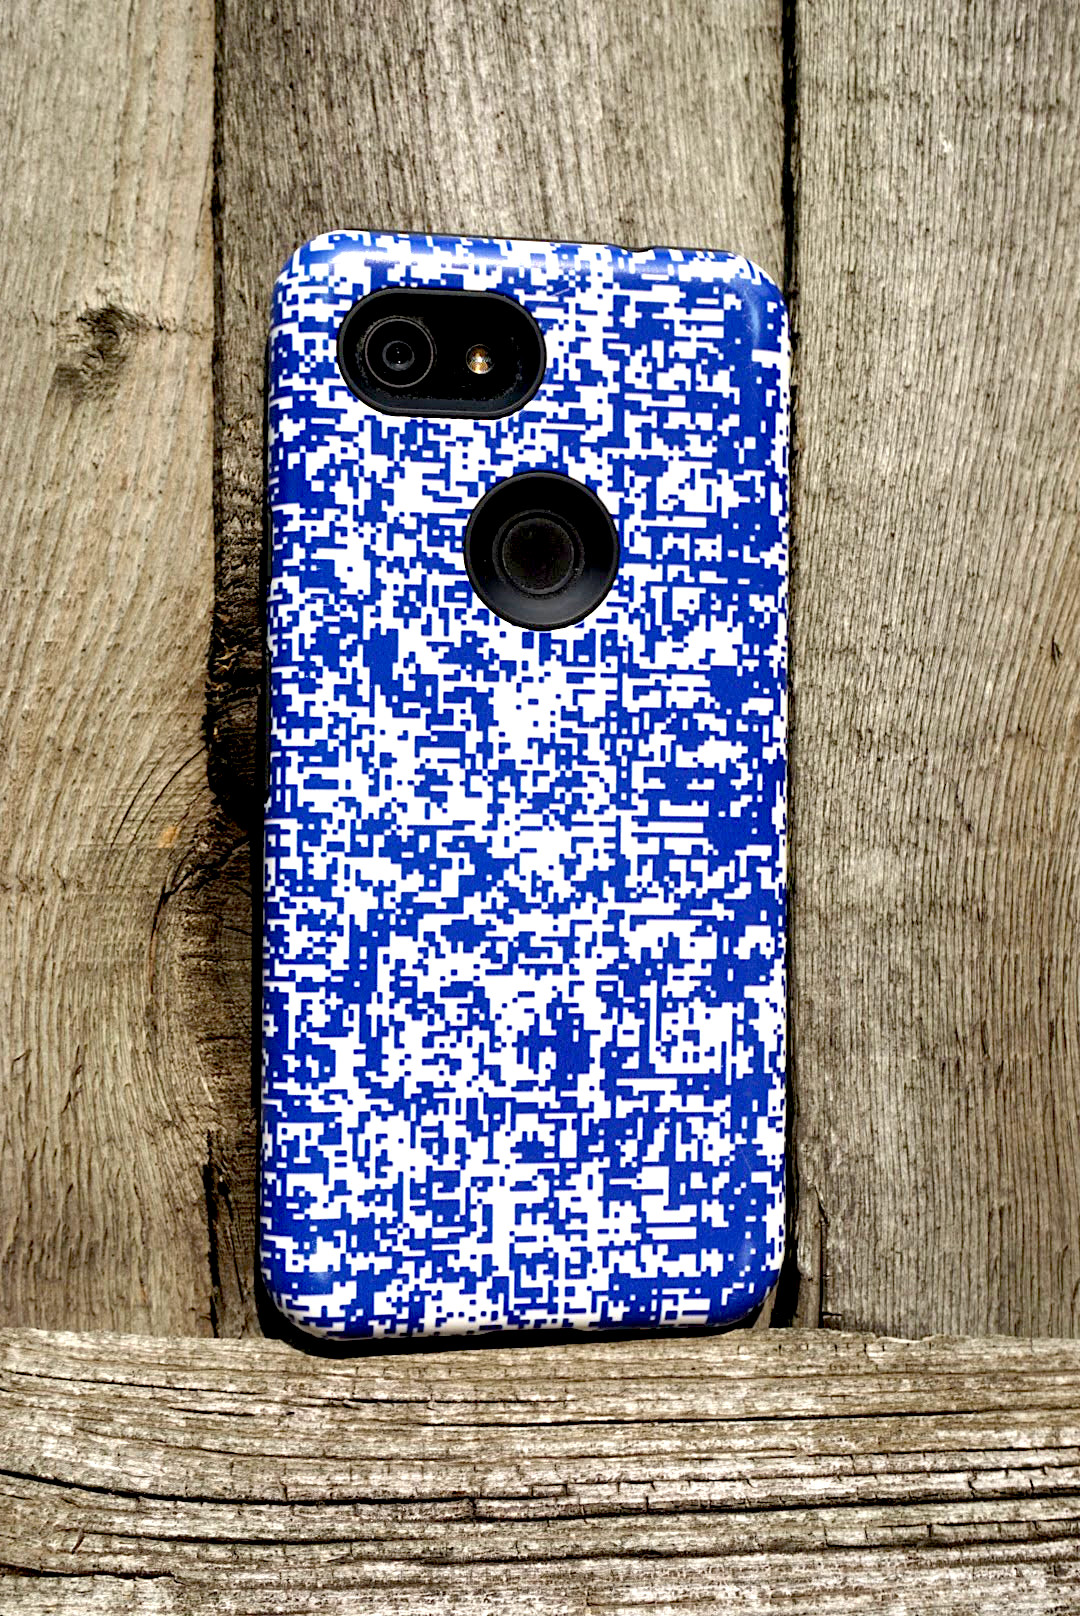 photo of a phone with a blue and white specked pattern on the case